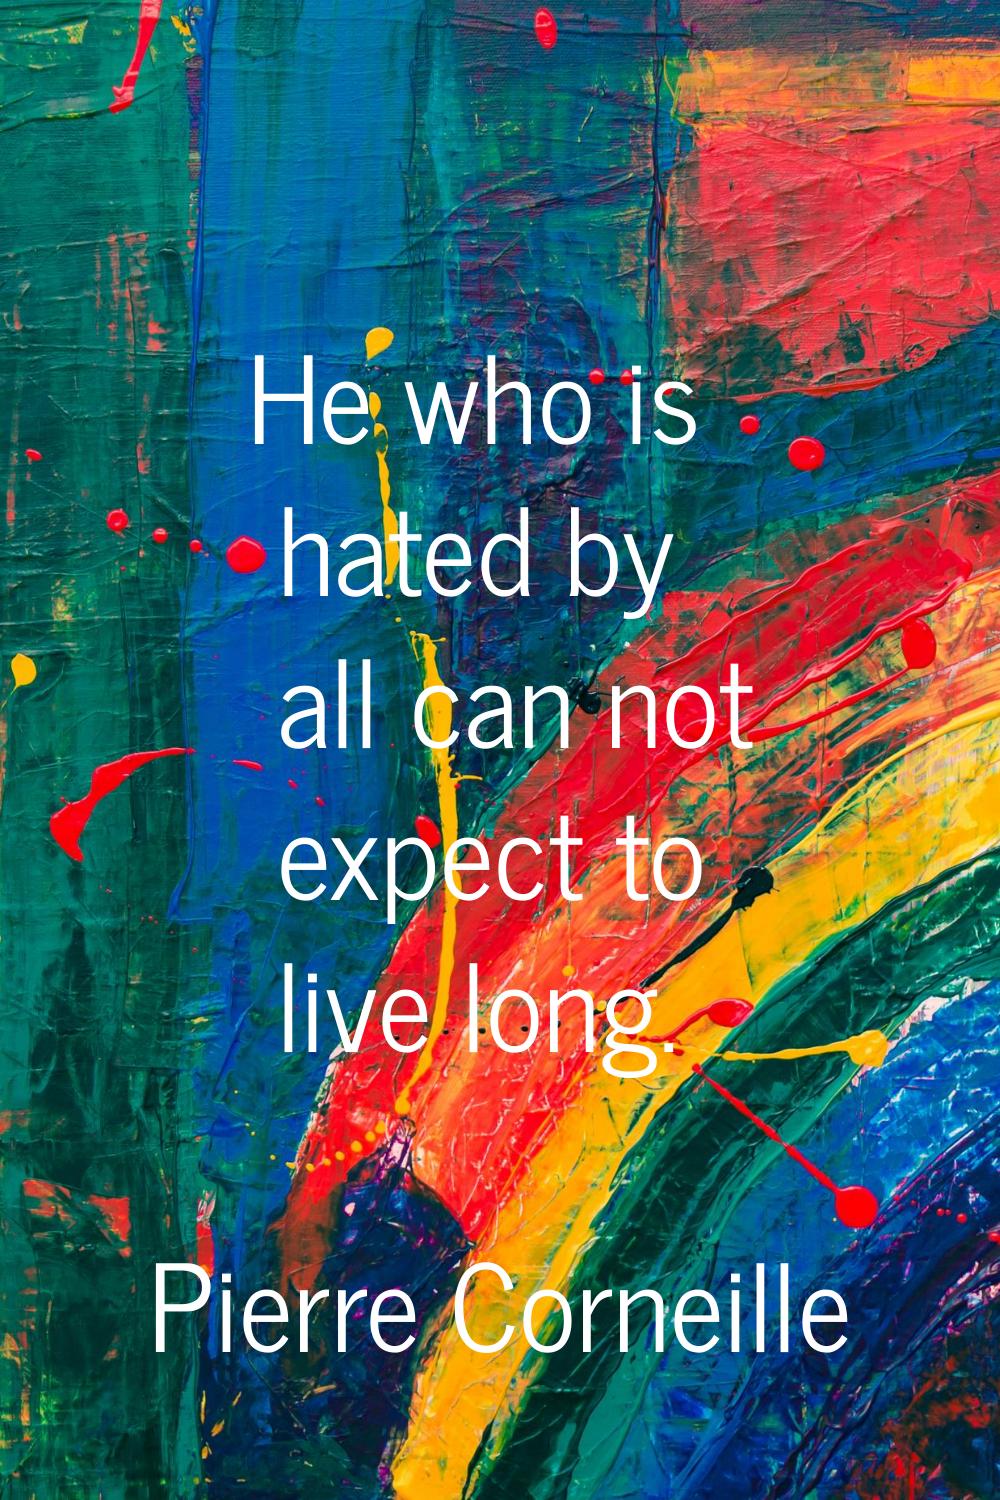 He who is hated by all can not expect to live long.